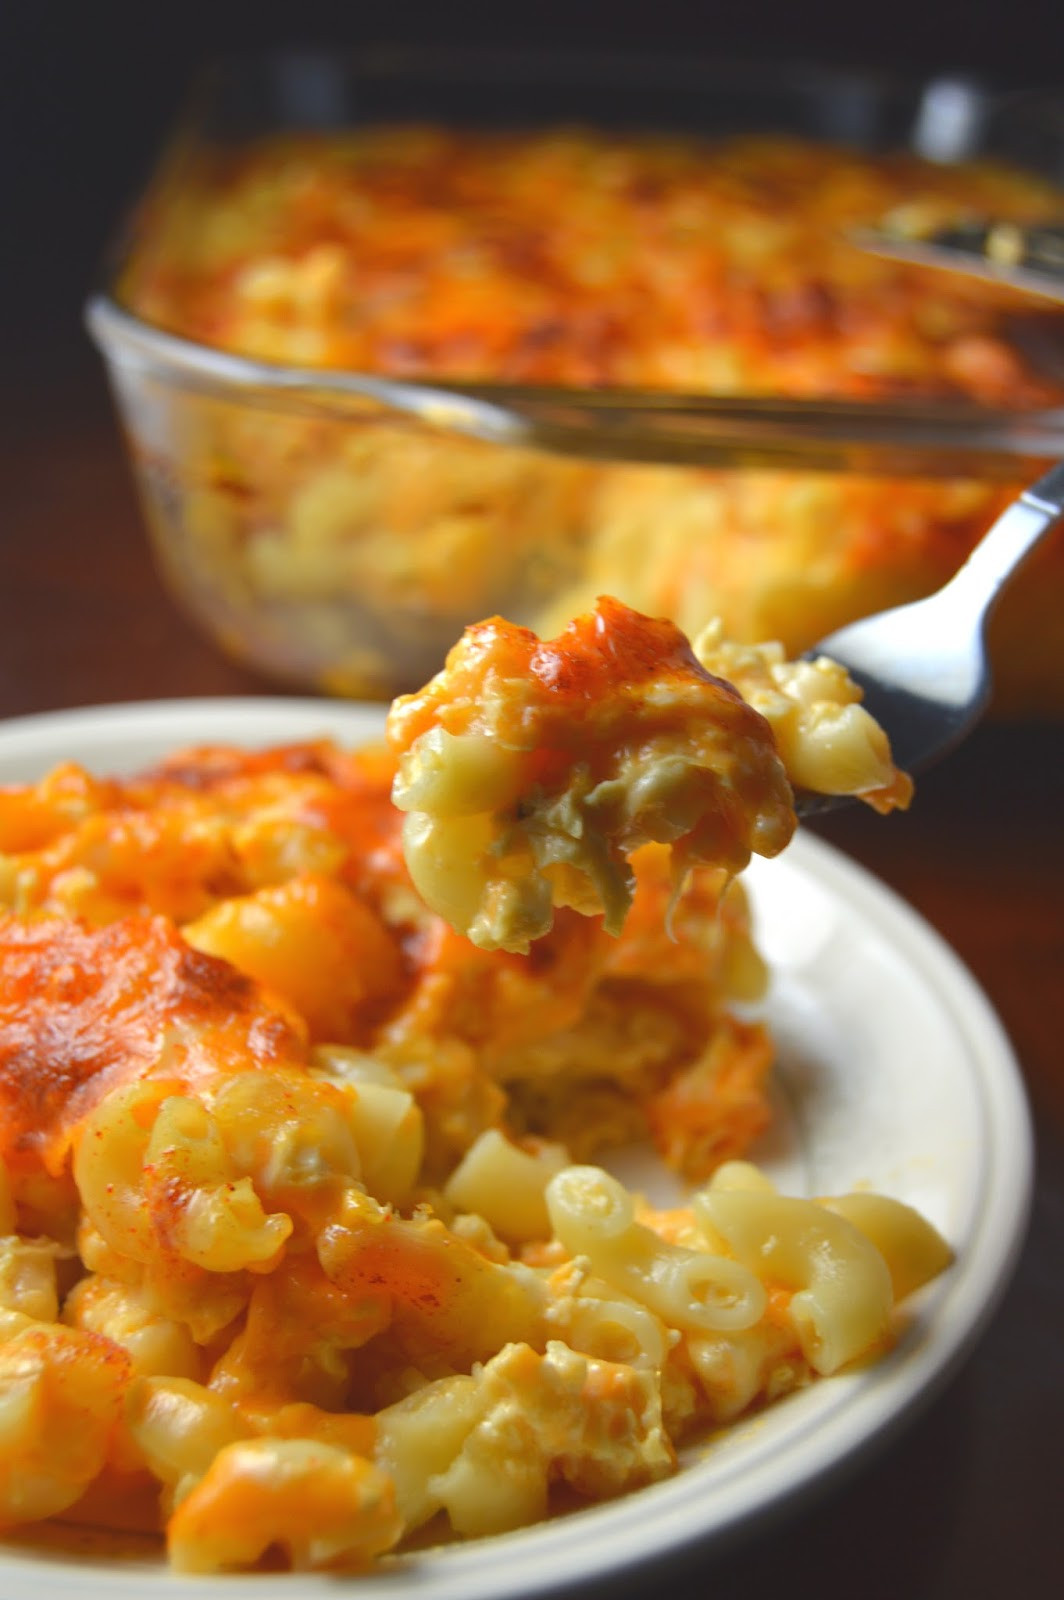 Simple Baked Macaroni And Cheese Recipe
 Baked Macaroni and Cheese